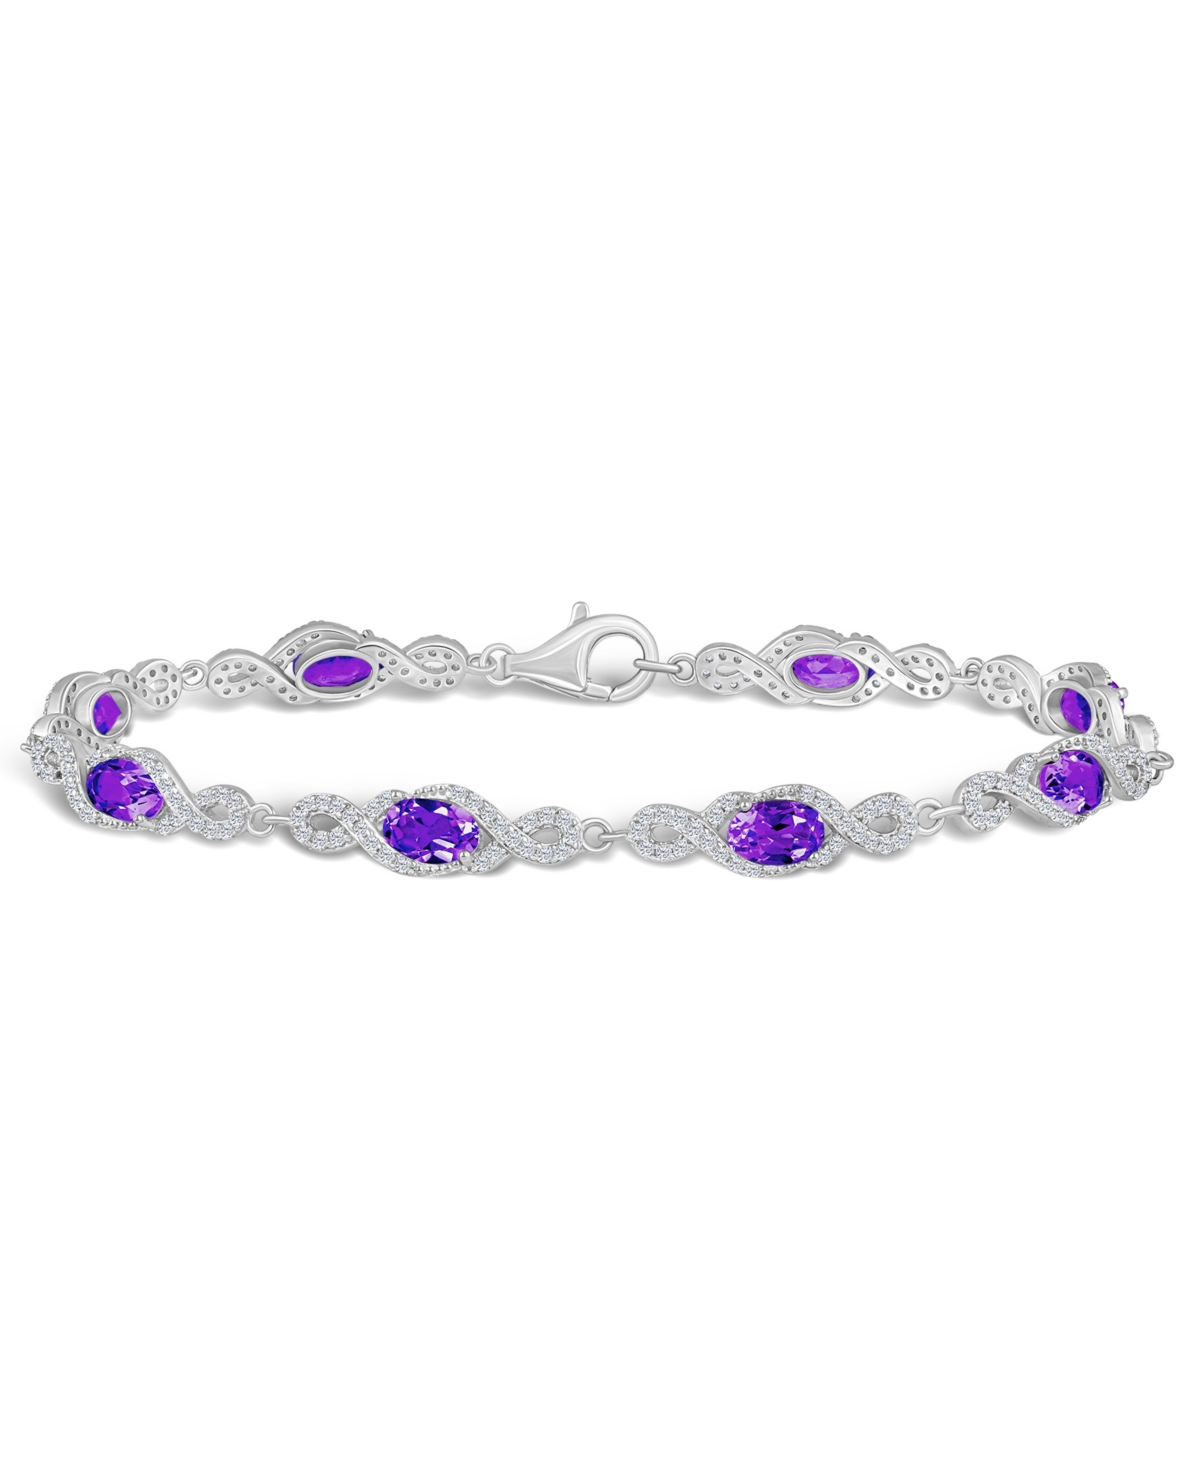 Macy's Amethyst And White Topaz Bracelet (3-5/8 Ct. T.w And 2 Ct. T.w) In Sterling Silver